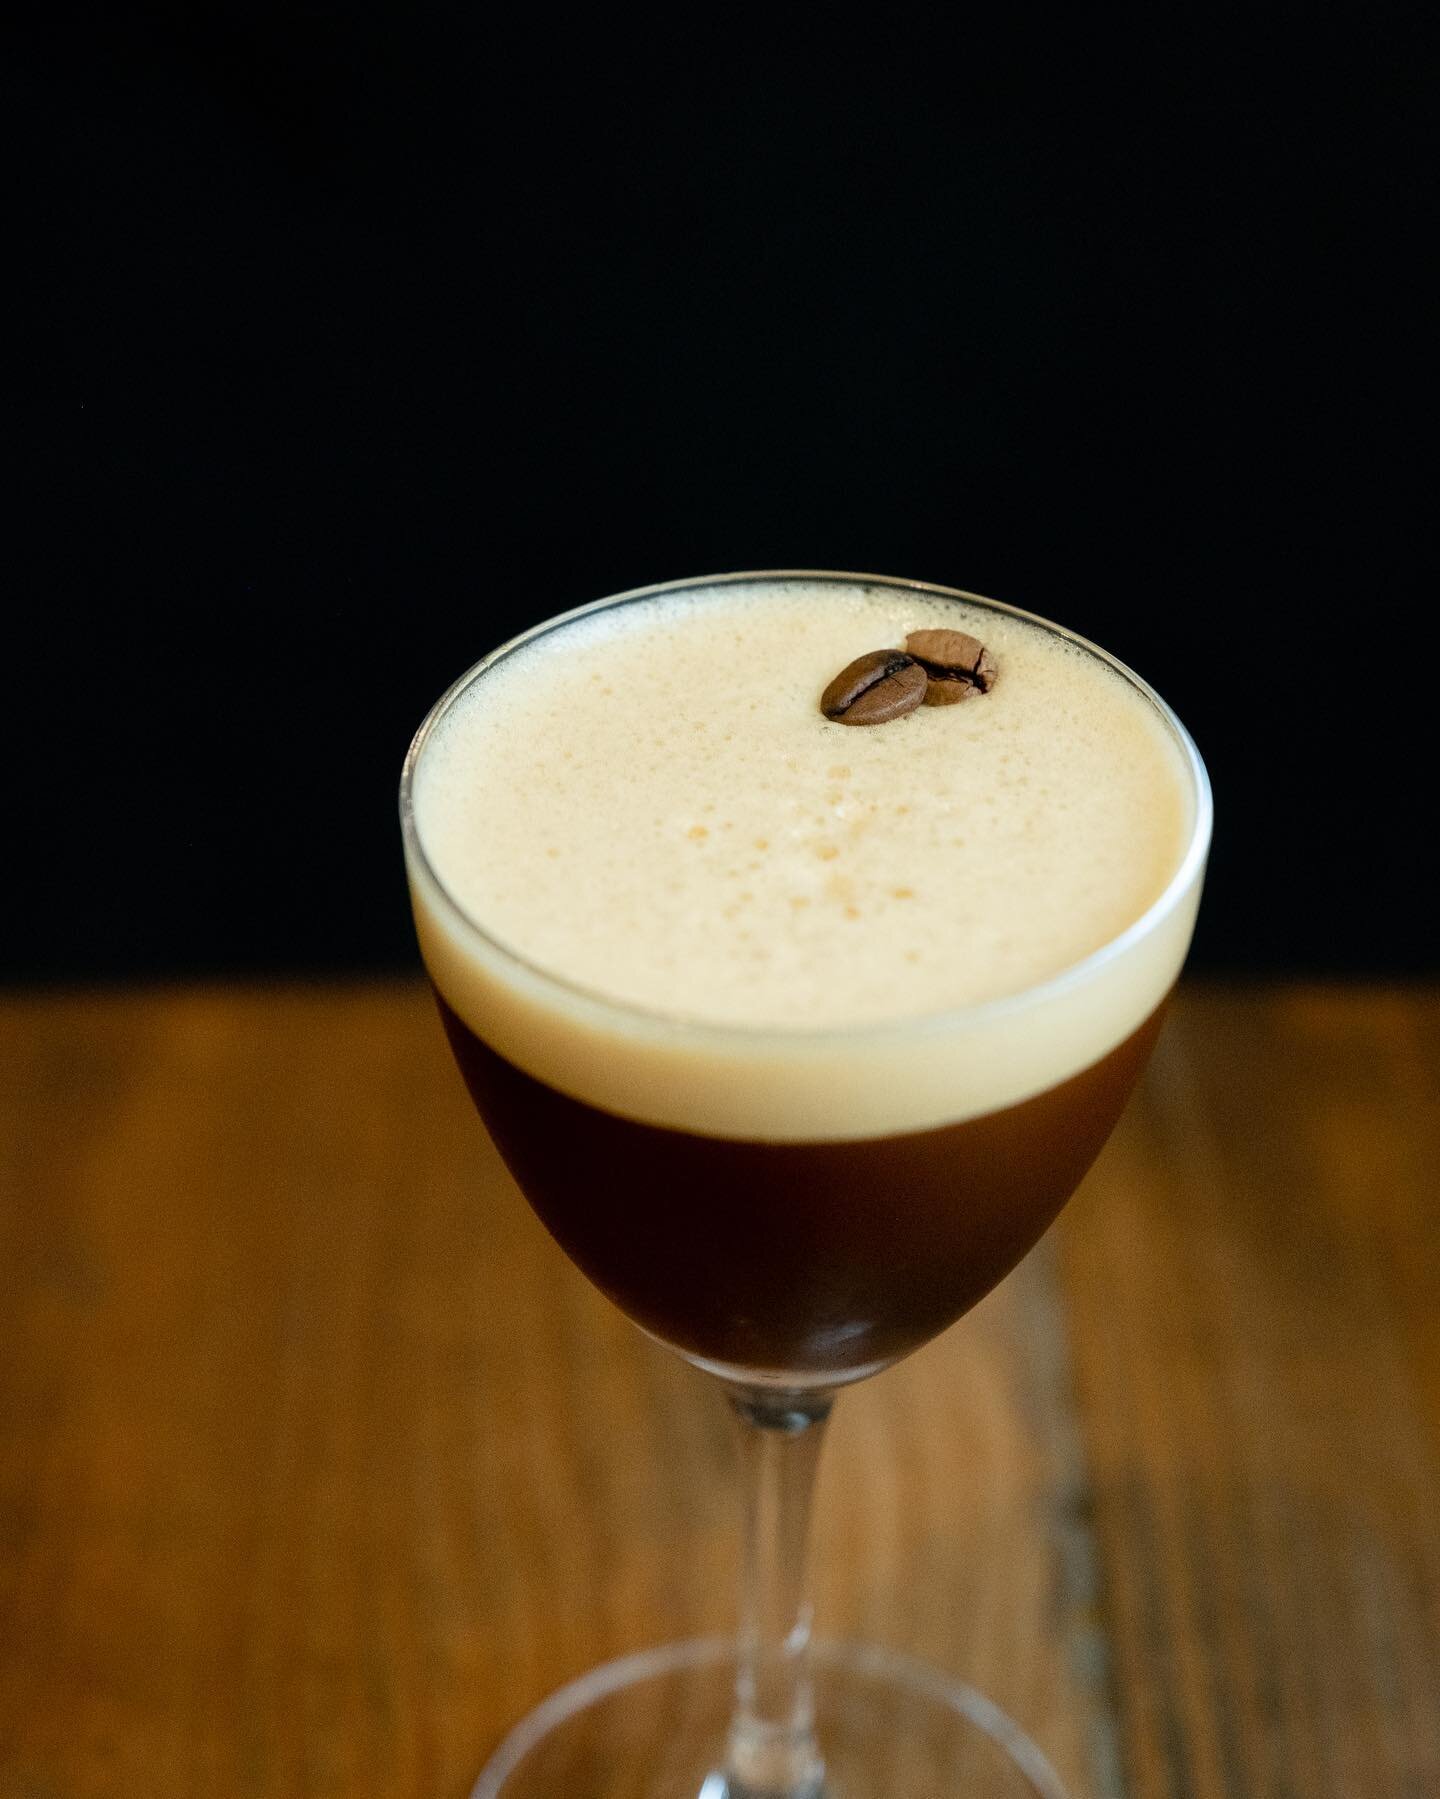 We&rsquo;ve got, in our opinion, the best espresso martini in Georgetown. 

@figure8coffeepurveyors on espresso, Tito&rsquo;s, house-made vanilla syrup. Available any time of day.